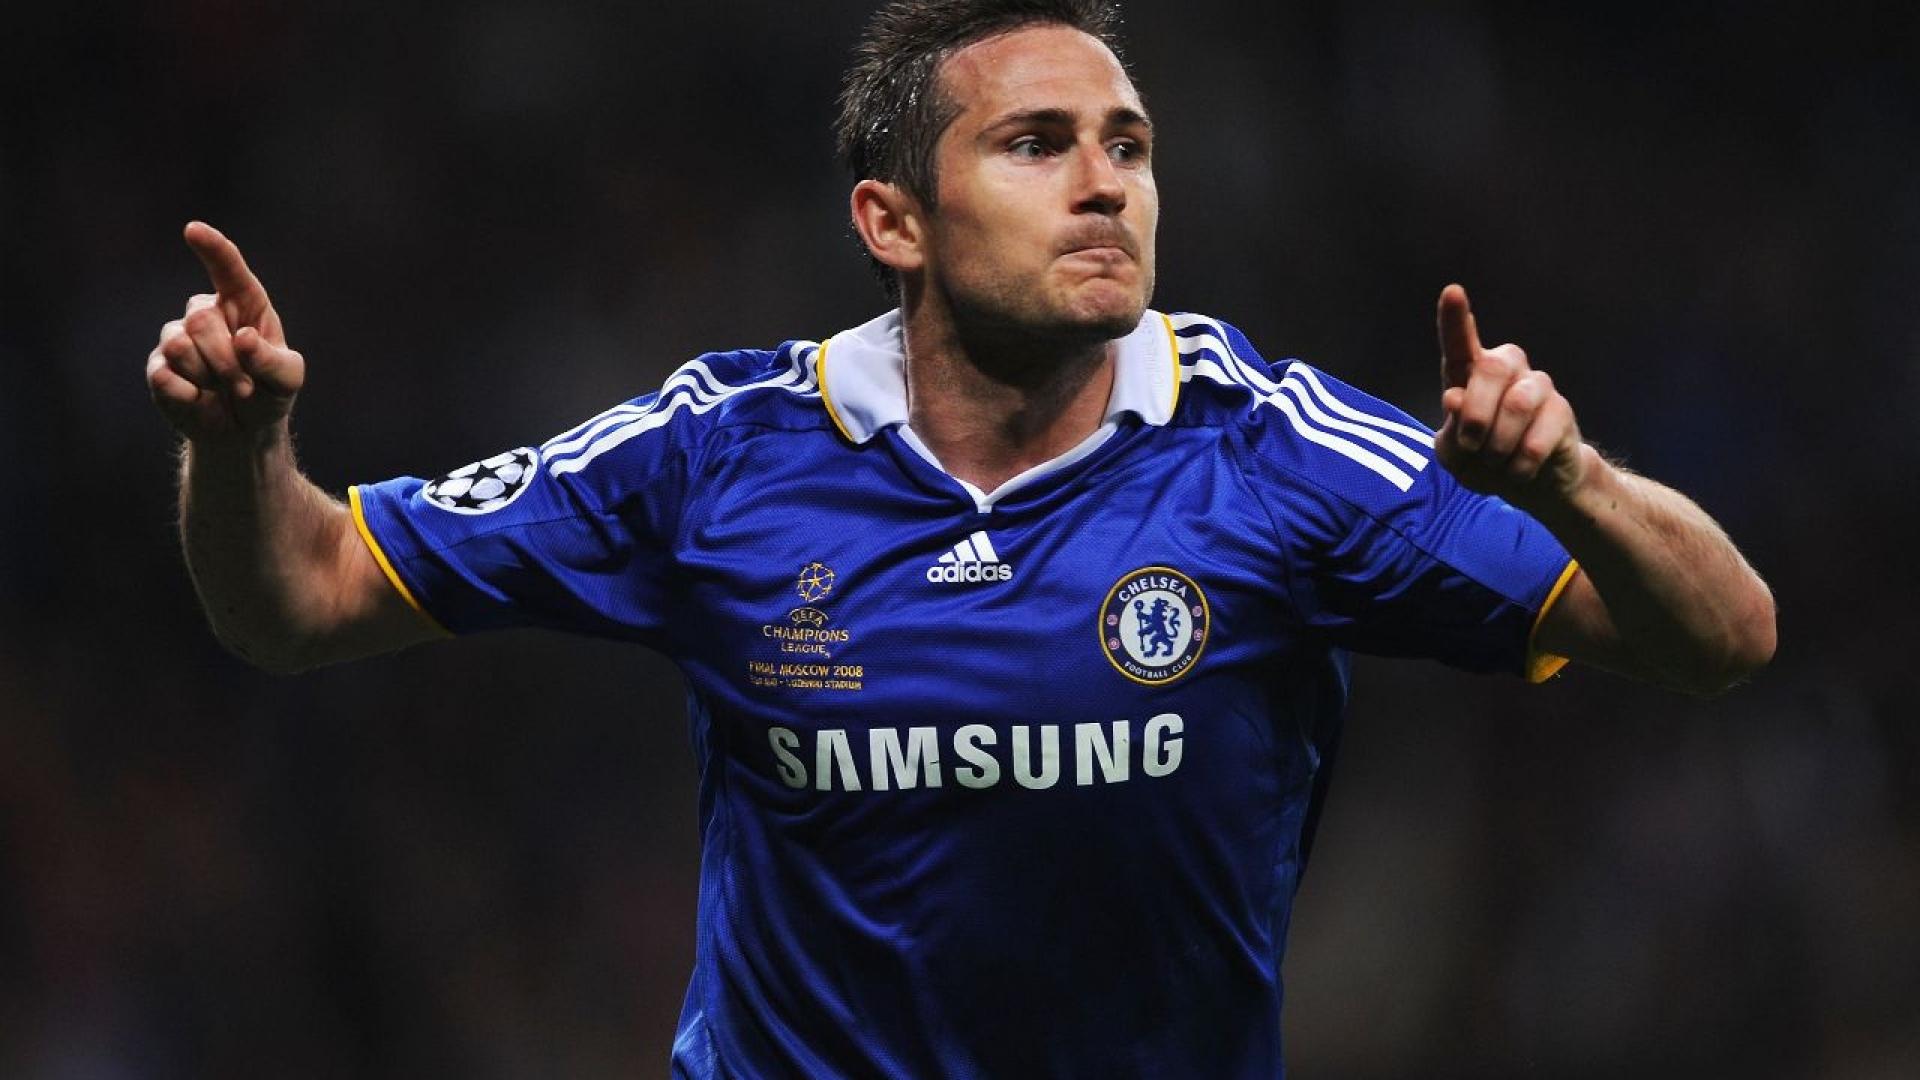 Happy birthday to one of the best ever midfielders. 

My idolo, Frank Lampard! 